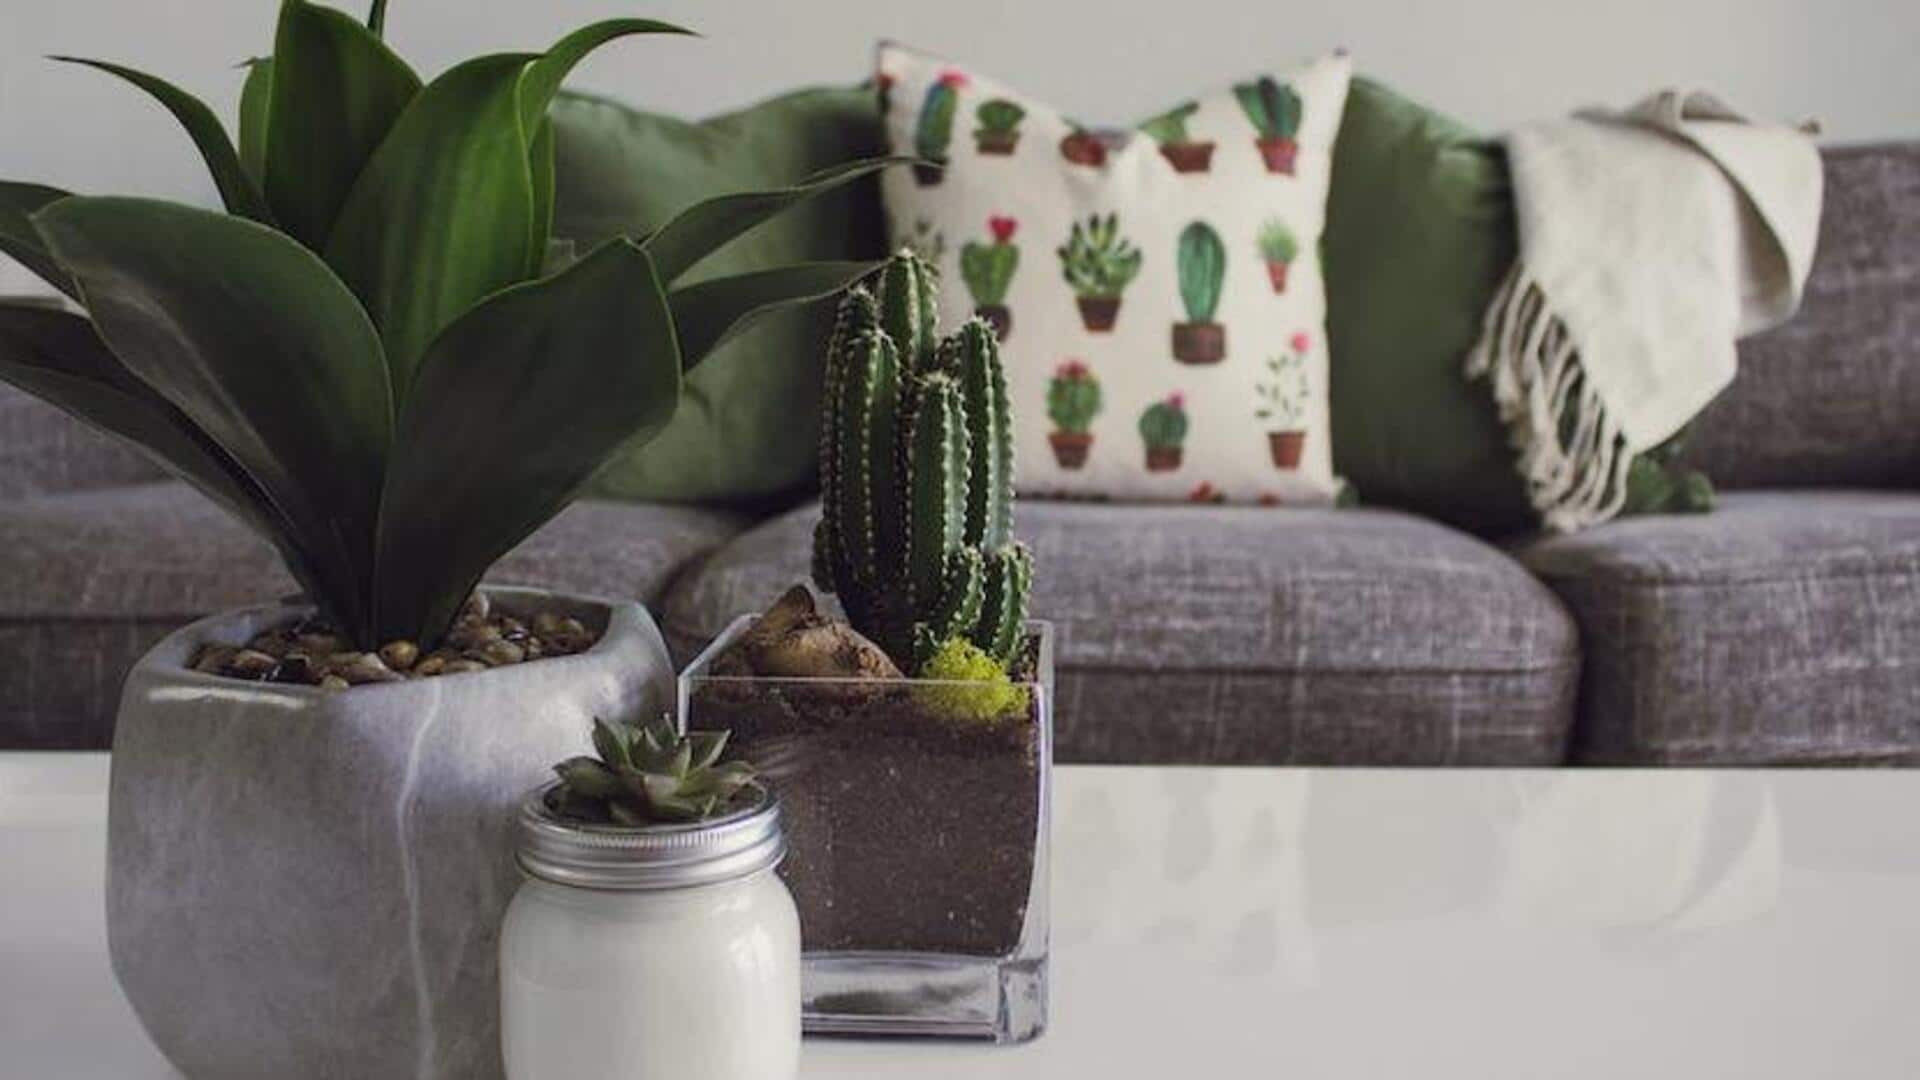 These plants will take your home decor up a notch